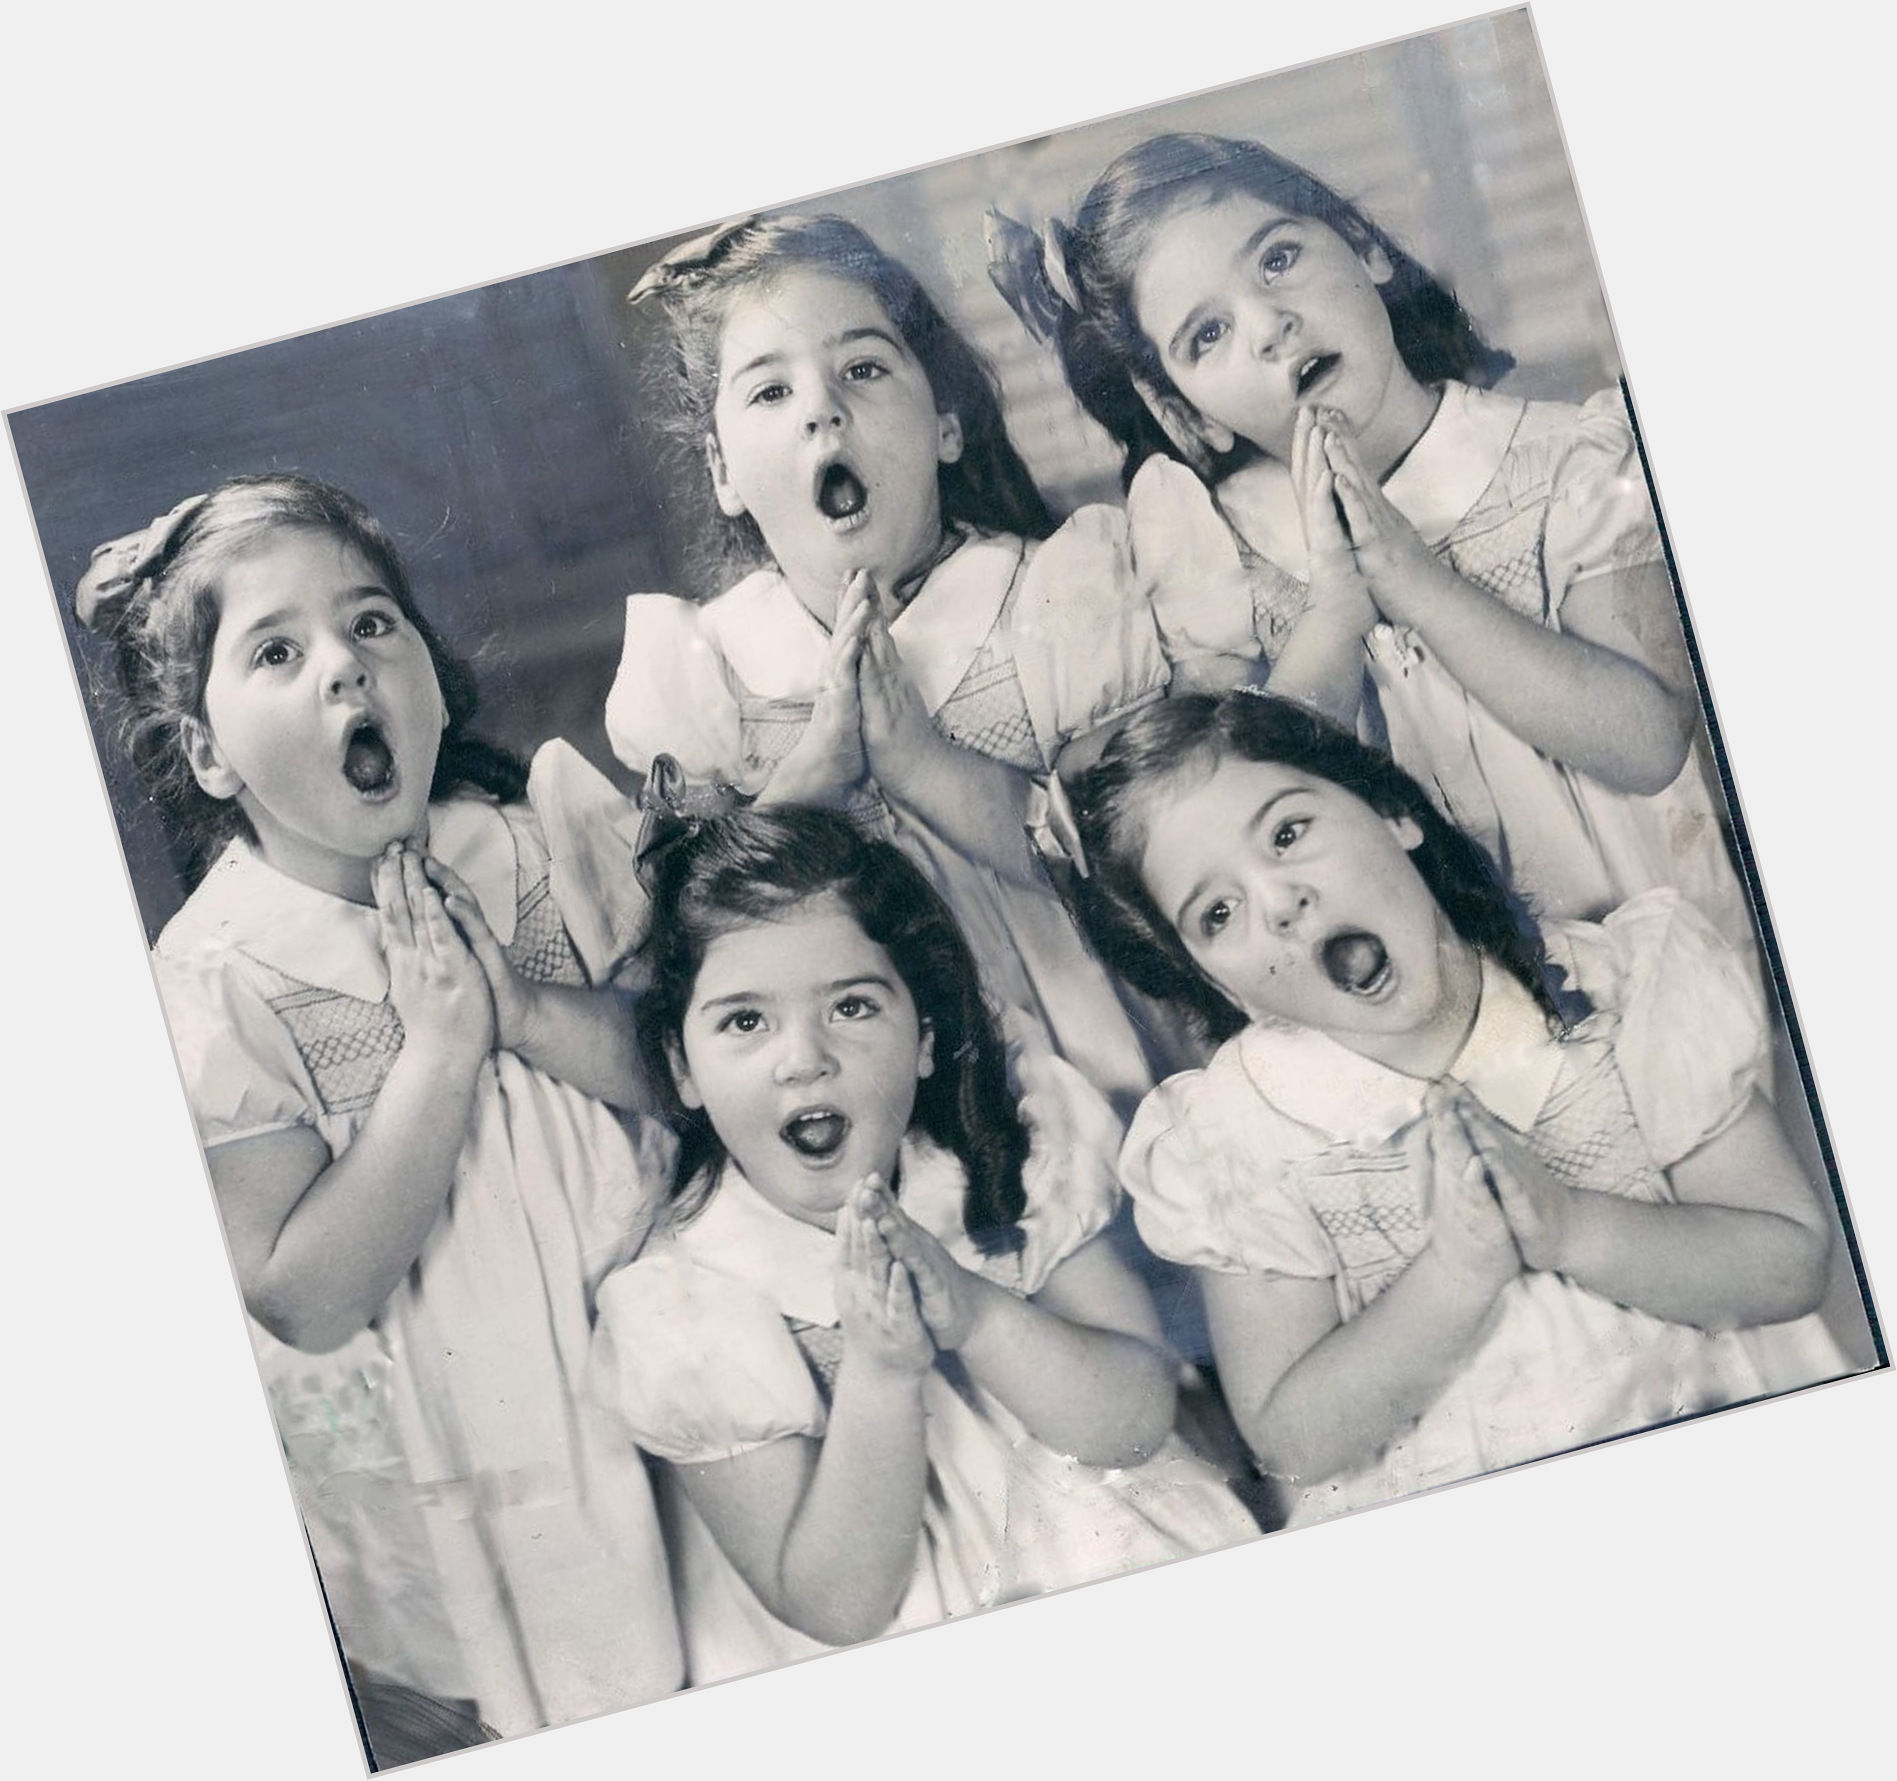 Dionne Quintuplets birthday 2015